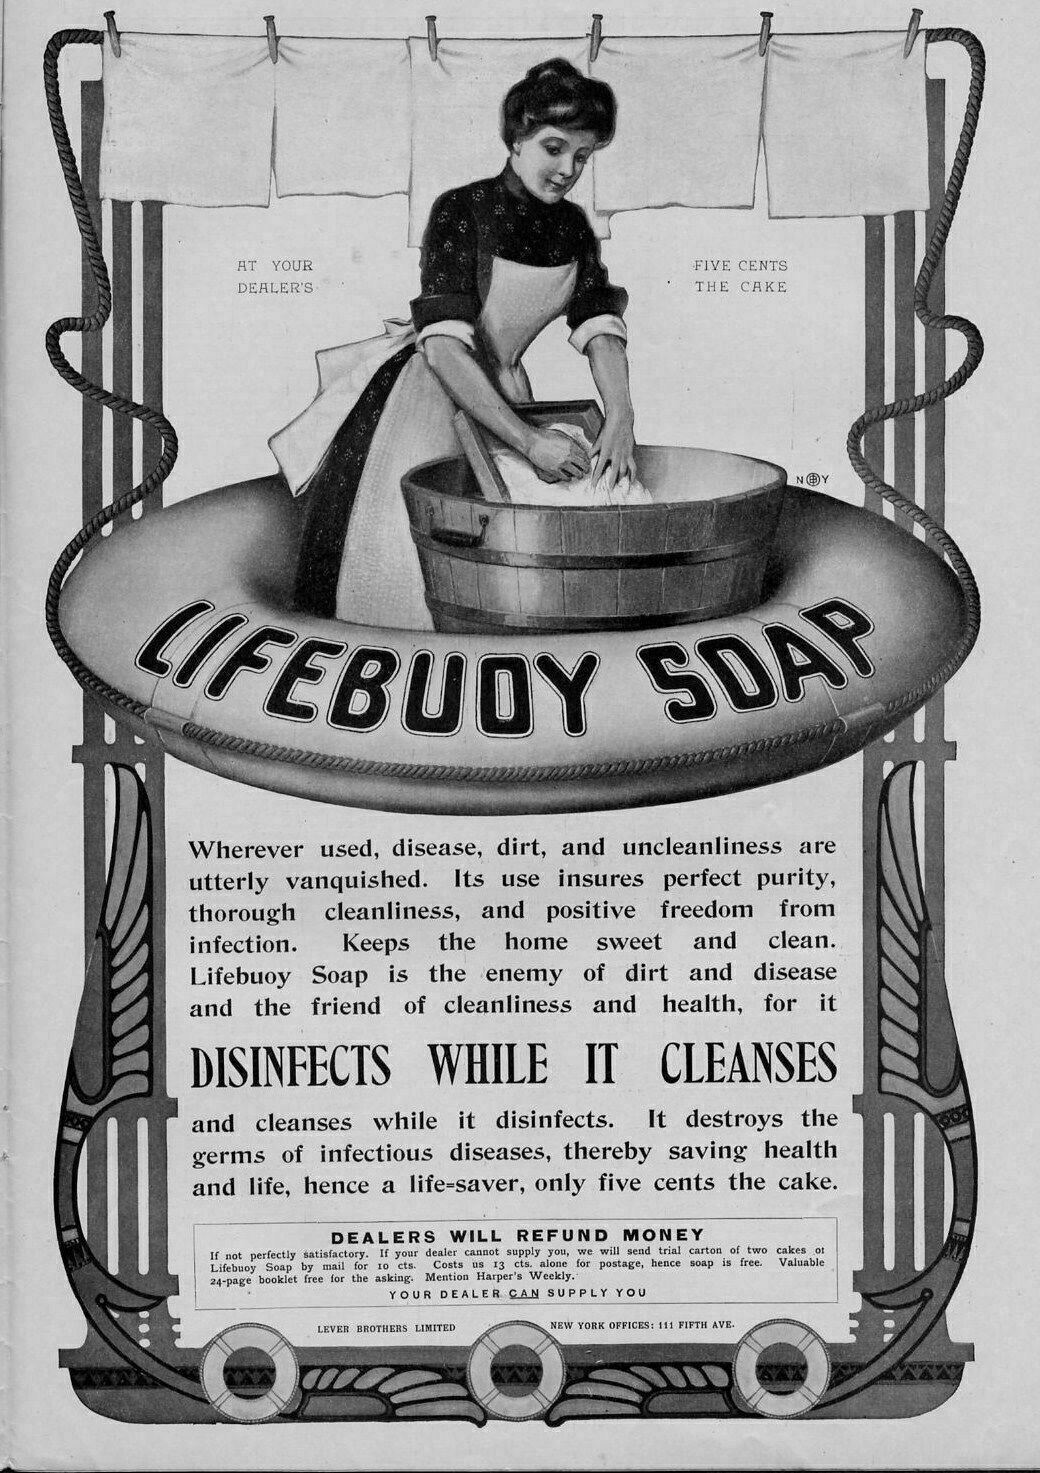 LIFEBUOY SOAP DISINFECTS WHILE IT CLEANSES DESTROYS INFECTIOUS DISEASE GERMS